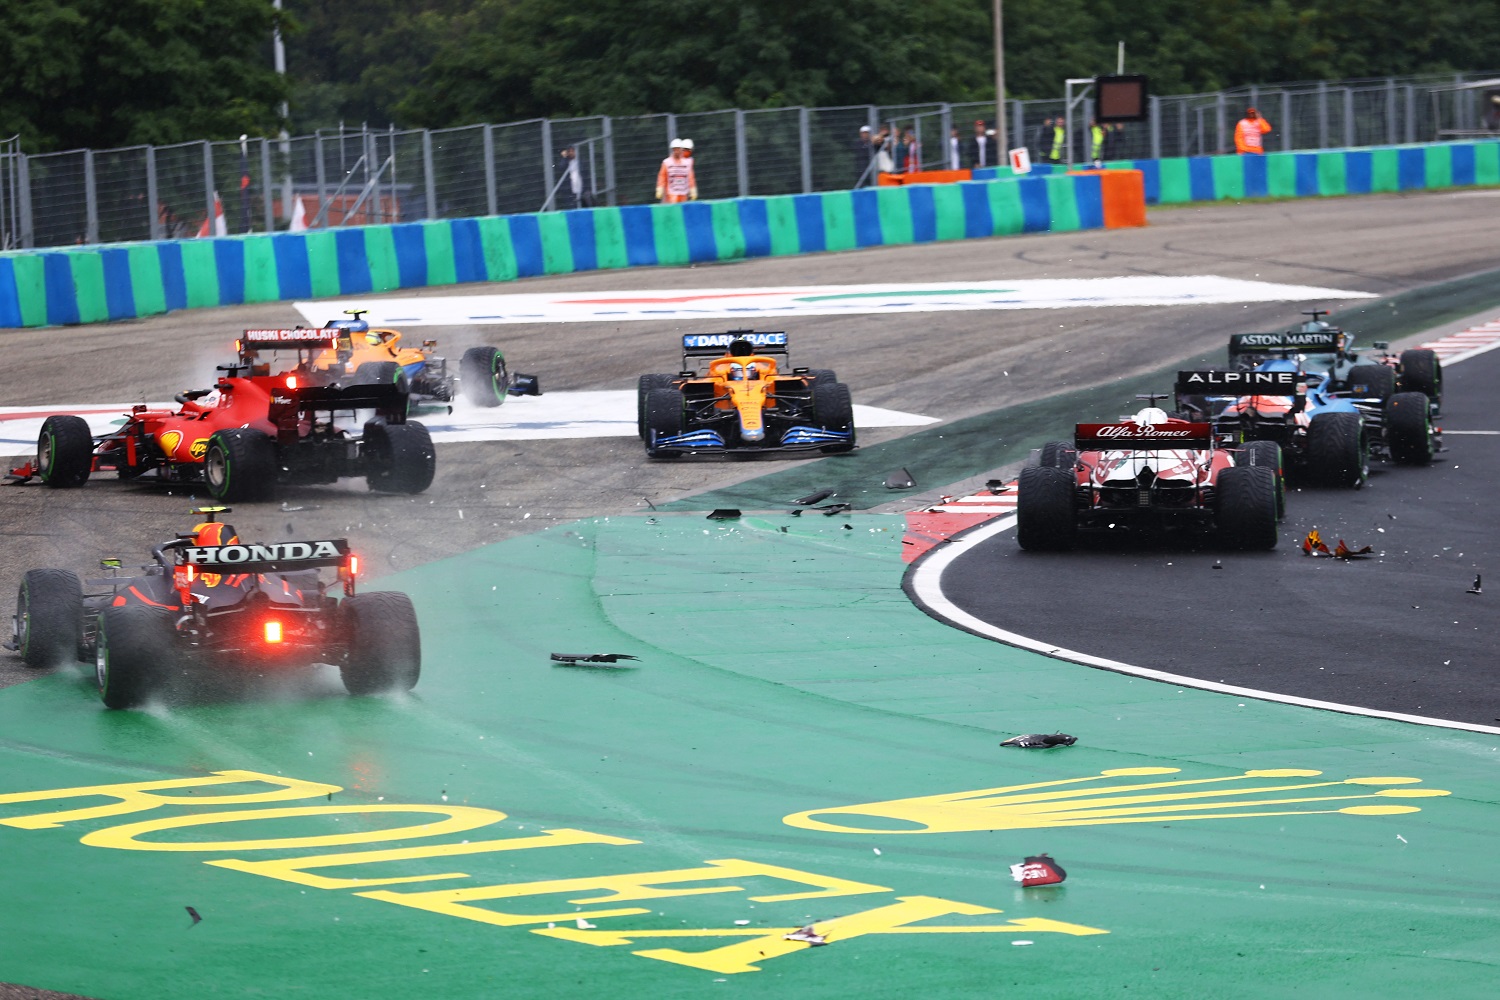 A view of the crash at the start during the F1 Grand Prix of Hungary at Hungaroring on August 1, 2021. | Bryn Lennon/Getty Images